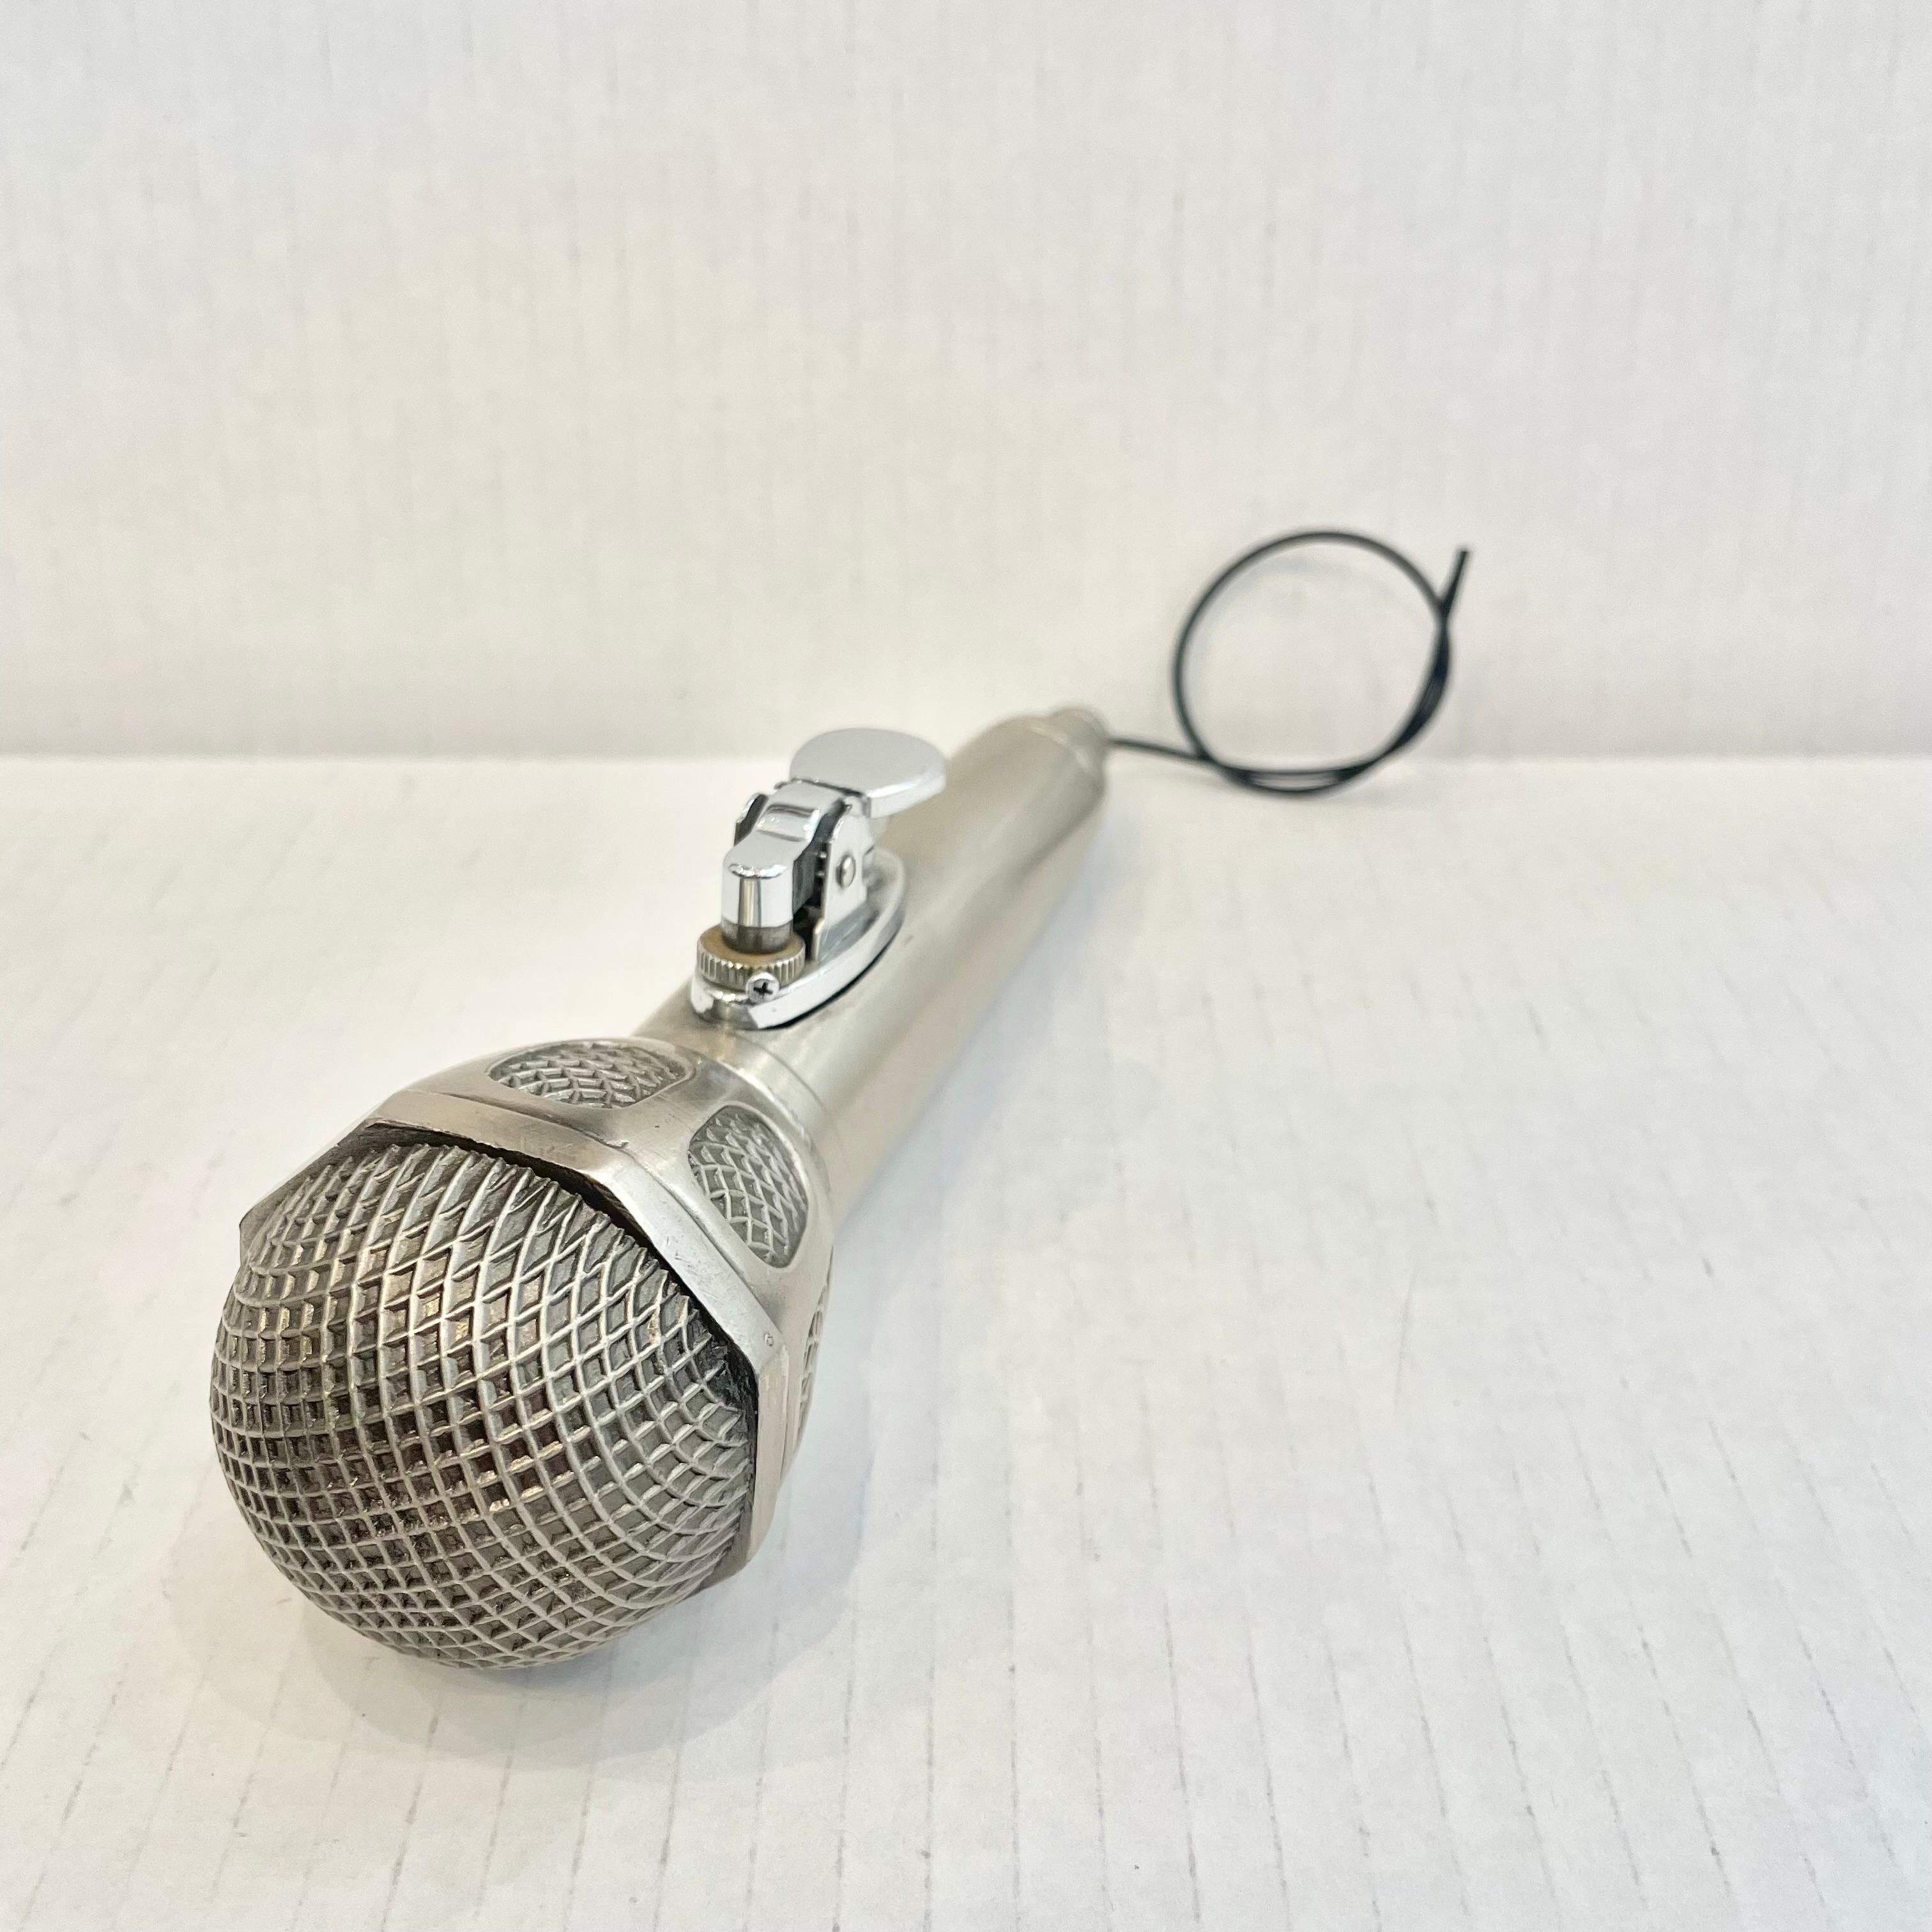 Great vintage table lighter in the shape of a microphone. Just over 7 inches long. Made completely of metal with a hollow body. Light patina giving this piece a classic silver color. The head has a detailed grille and metal casing. Small rubber cord